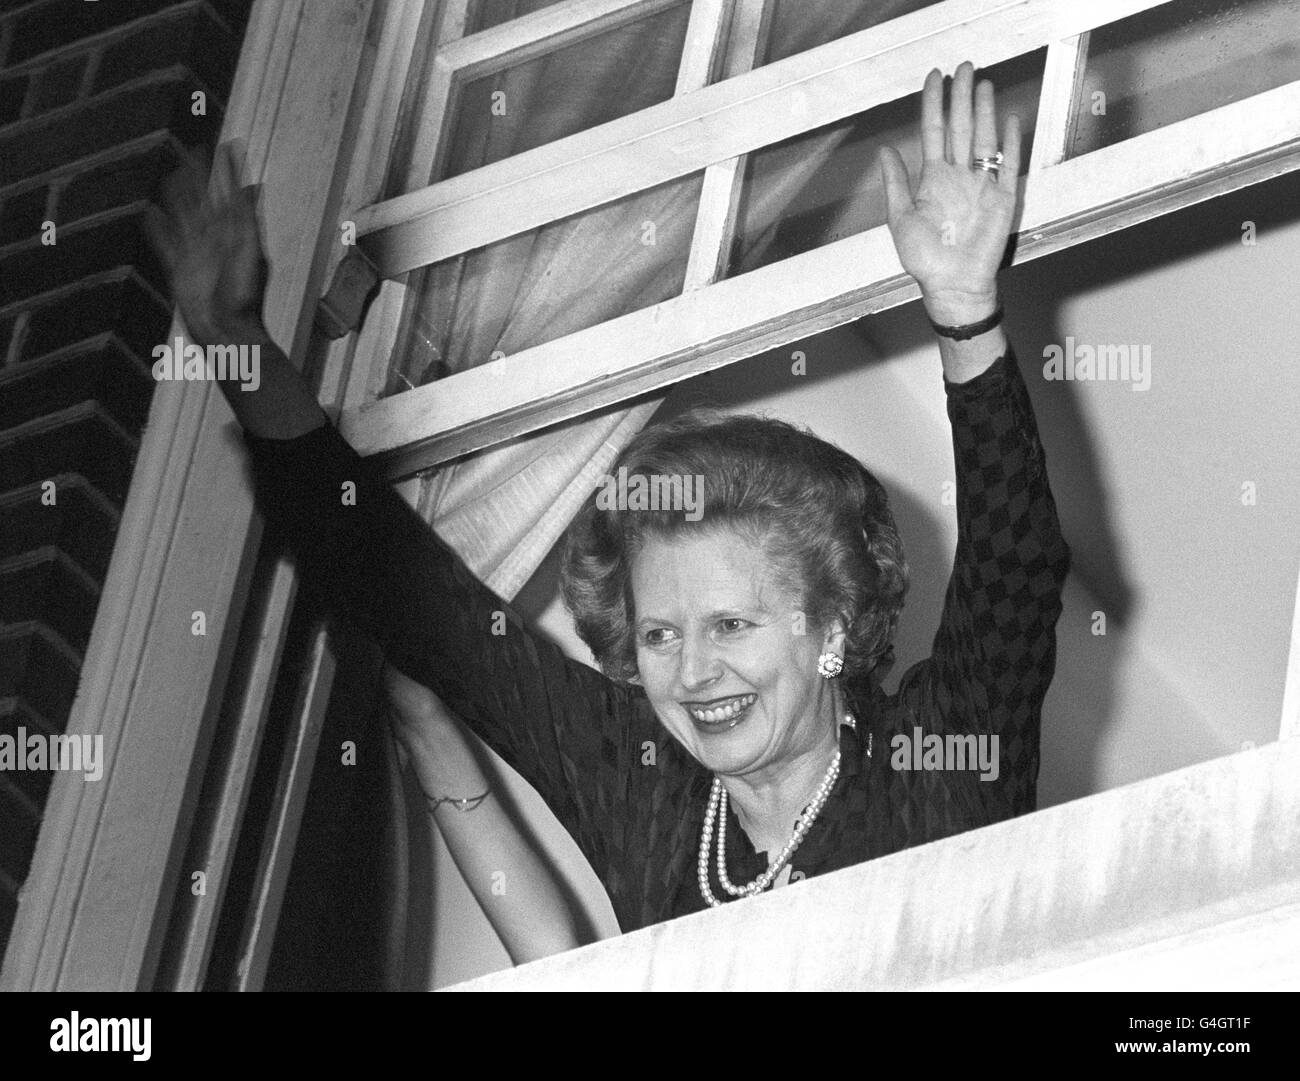 10th JUNE: On this day in 1983 Margaret Thatcher won a landslide victory to start her second term of power. The window of success frames the jubilant Prime Minister Margaret Thatcher waving to well-wishers after her election win. At Tory Party headquarters, she told flag-waving supporters 'My victory is greater than I had dared to hope'. Stock Photo